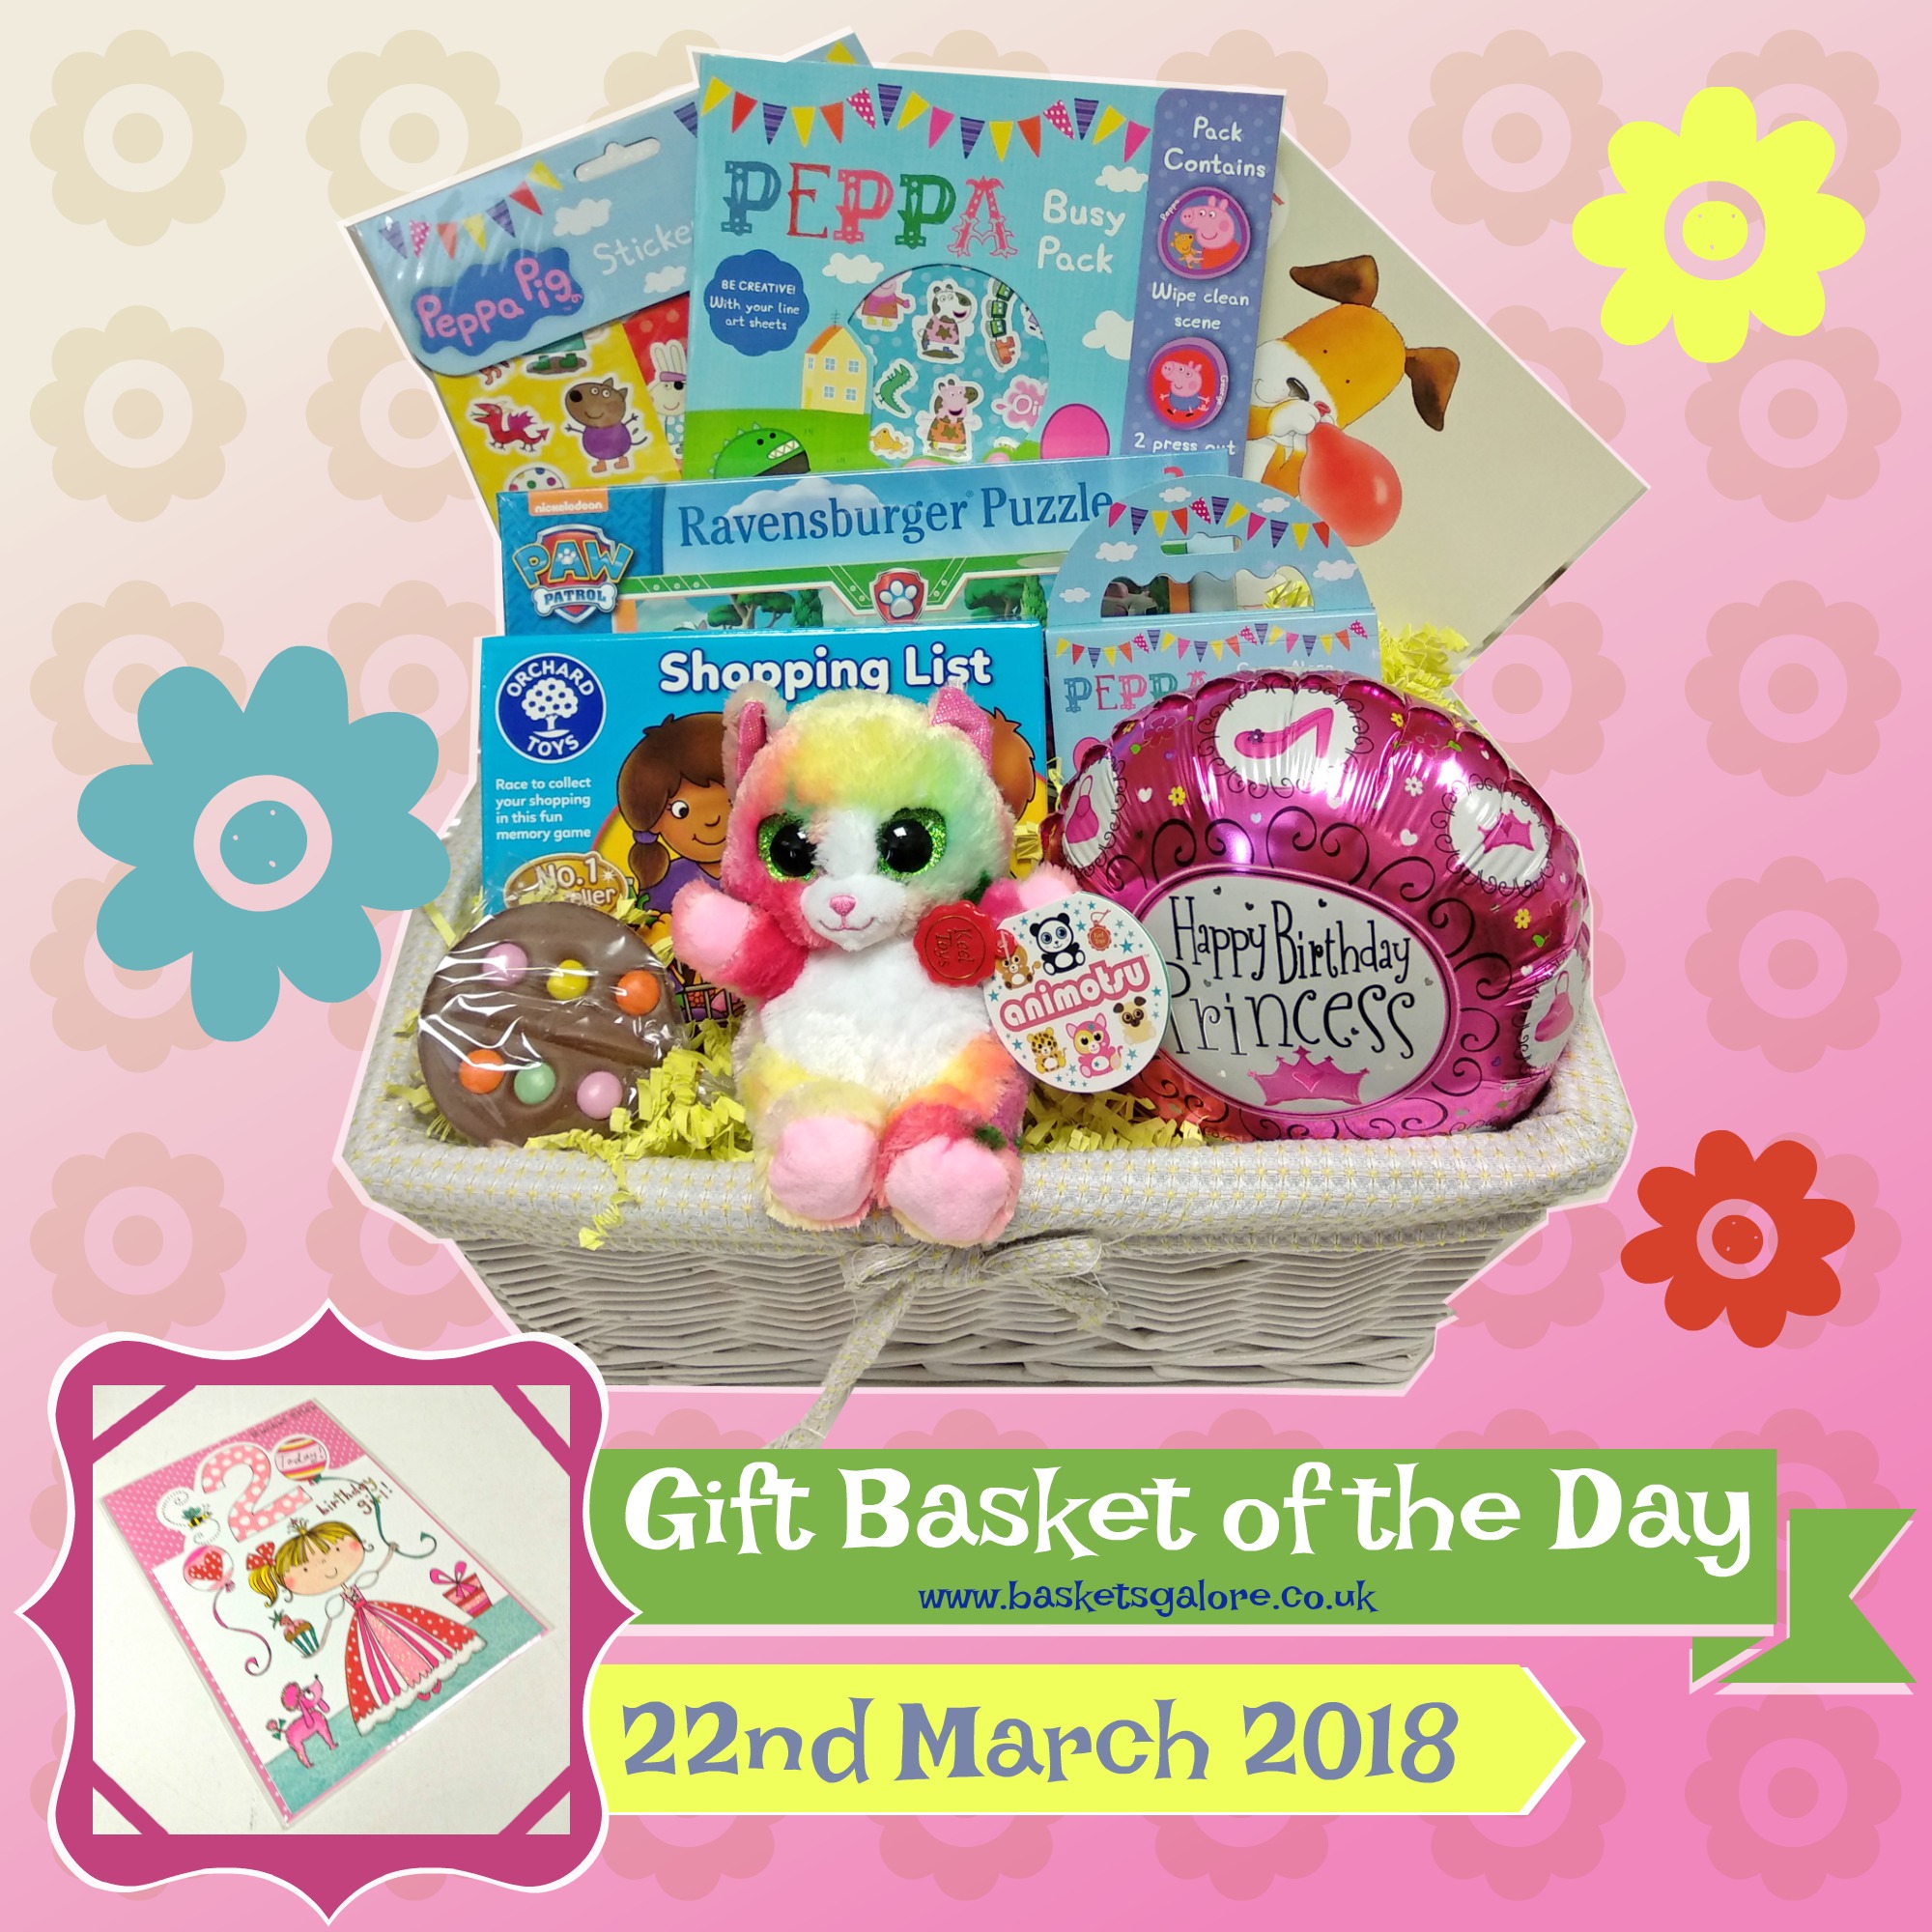 Baskets Galore’s Customer Gifts – Gift Basket of the Day 22.03.18